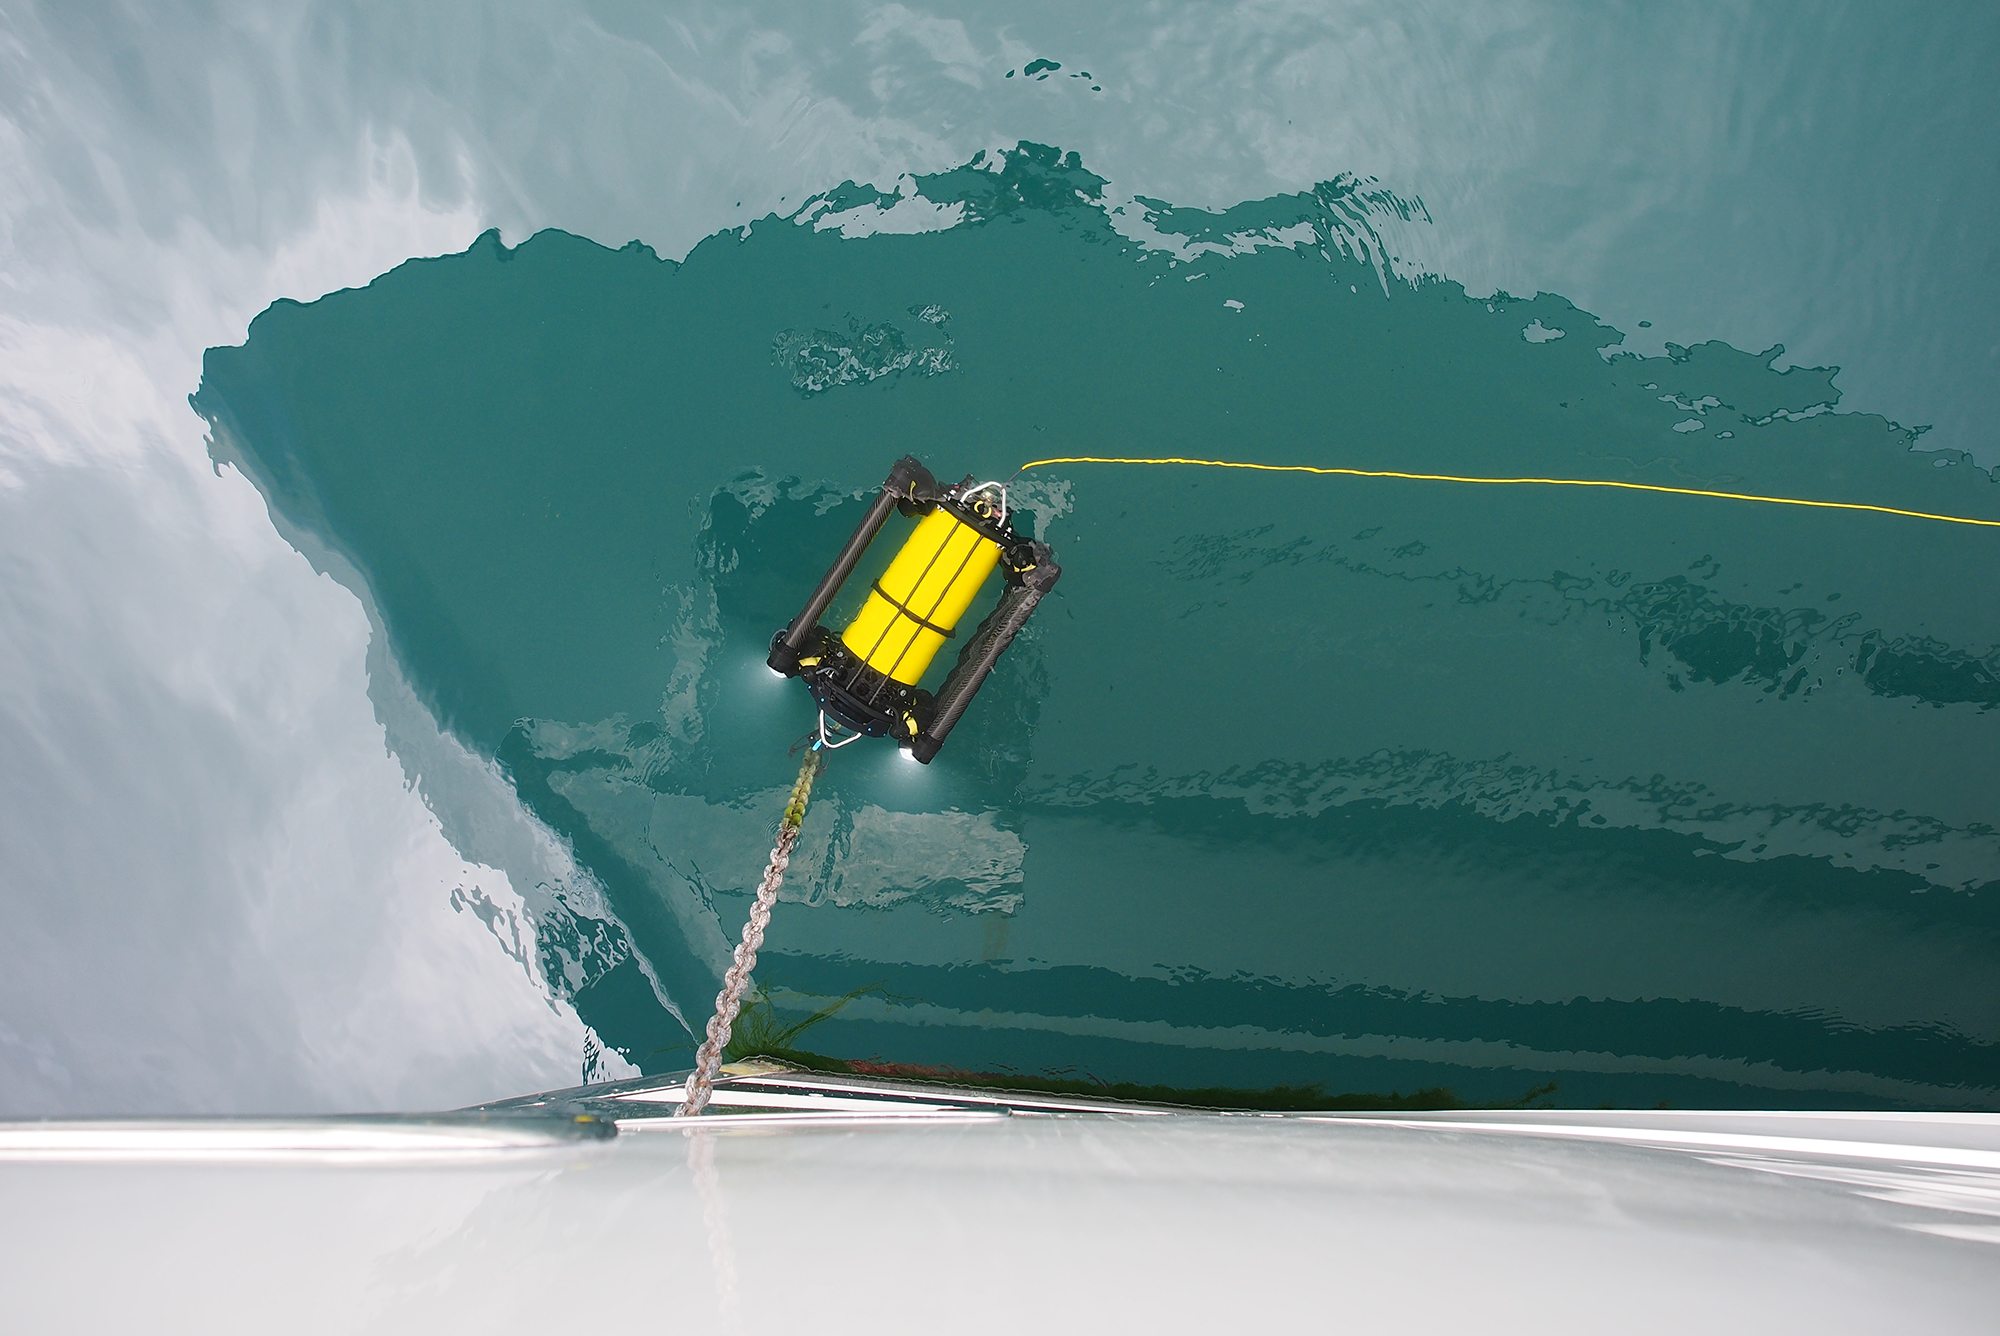 Boxfish ROV pictured in the water with a reflection of a yacht